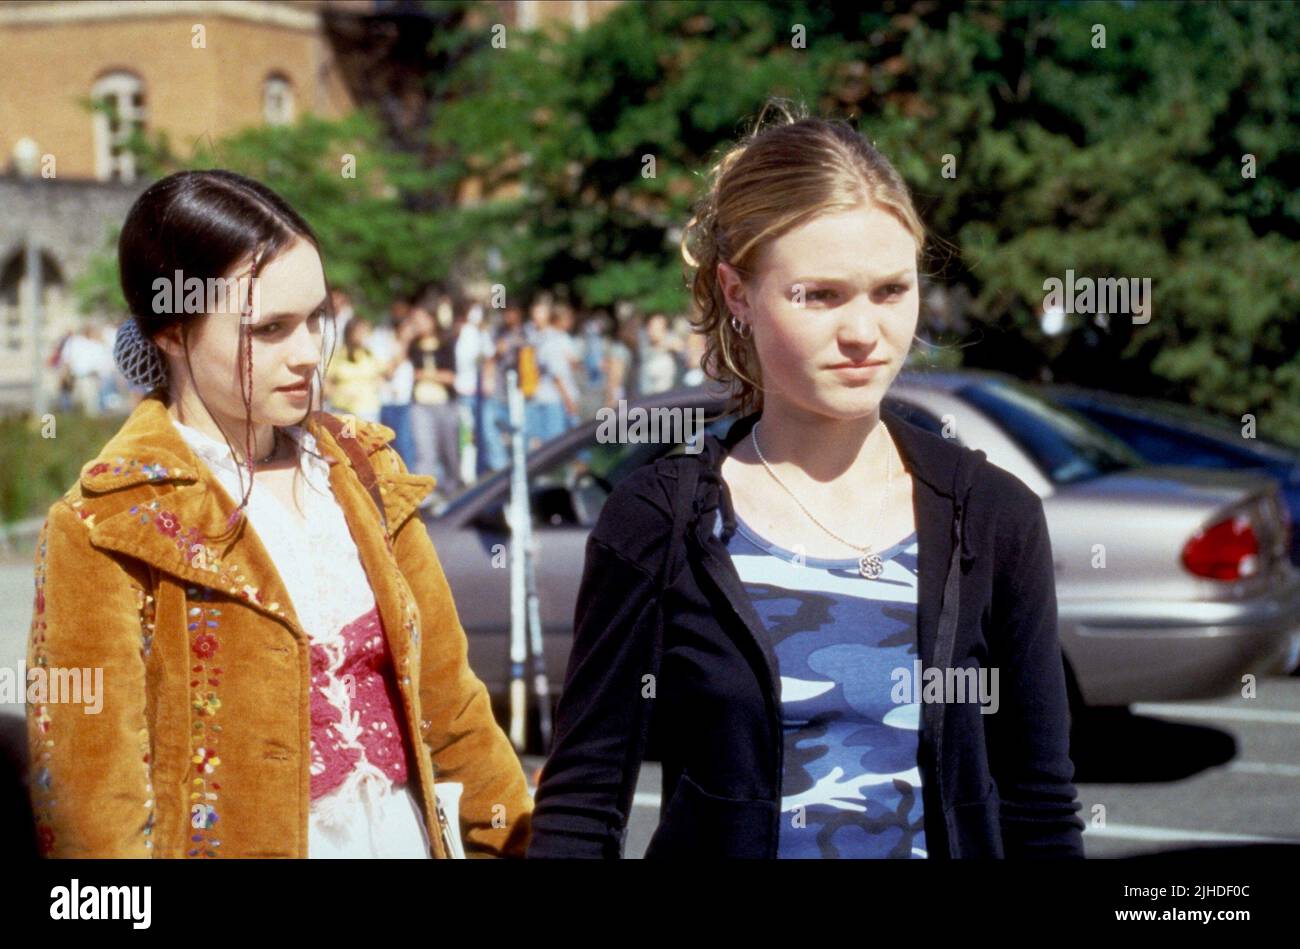 SUSAN MAY PRATT, JULIA STILES, 10 THINGS I HATE ABOUT YOU, 1999 Stock Photo